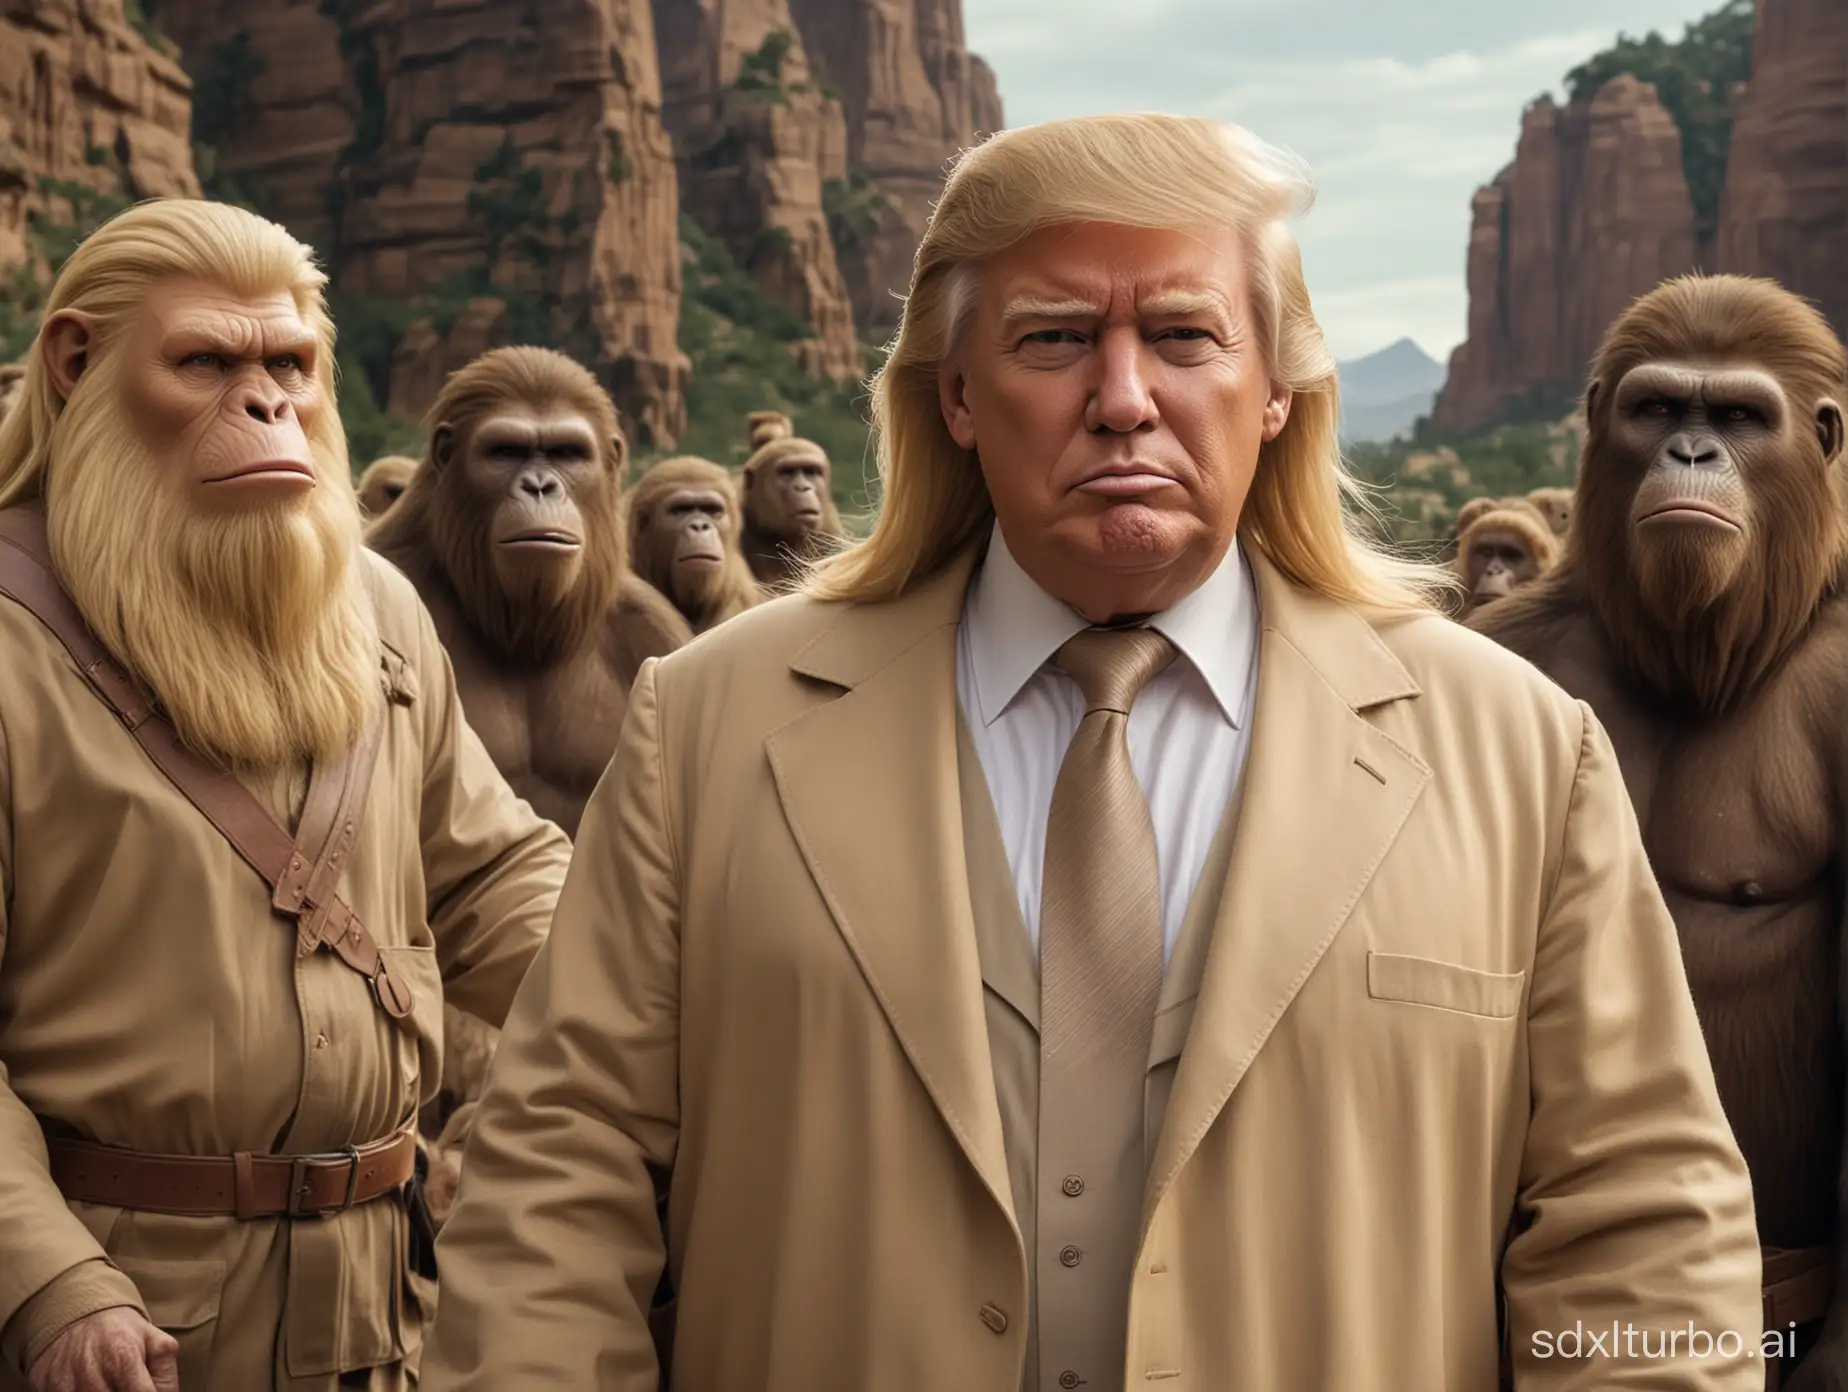 A photo realistic picture of Donald Trump wearing the exact style beige clothing of Doctor Zaius on the original film of Planet of The Apes.